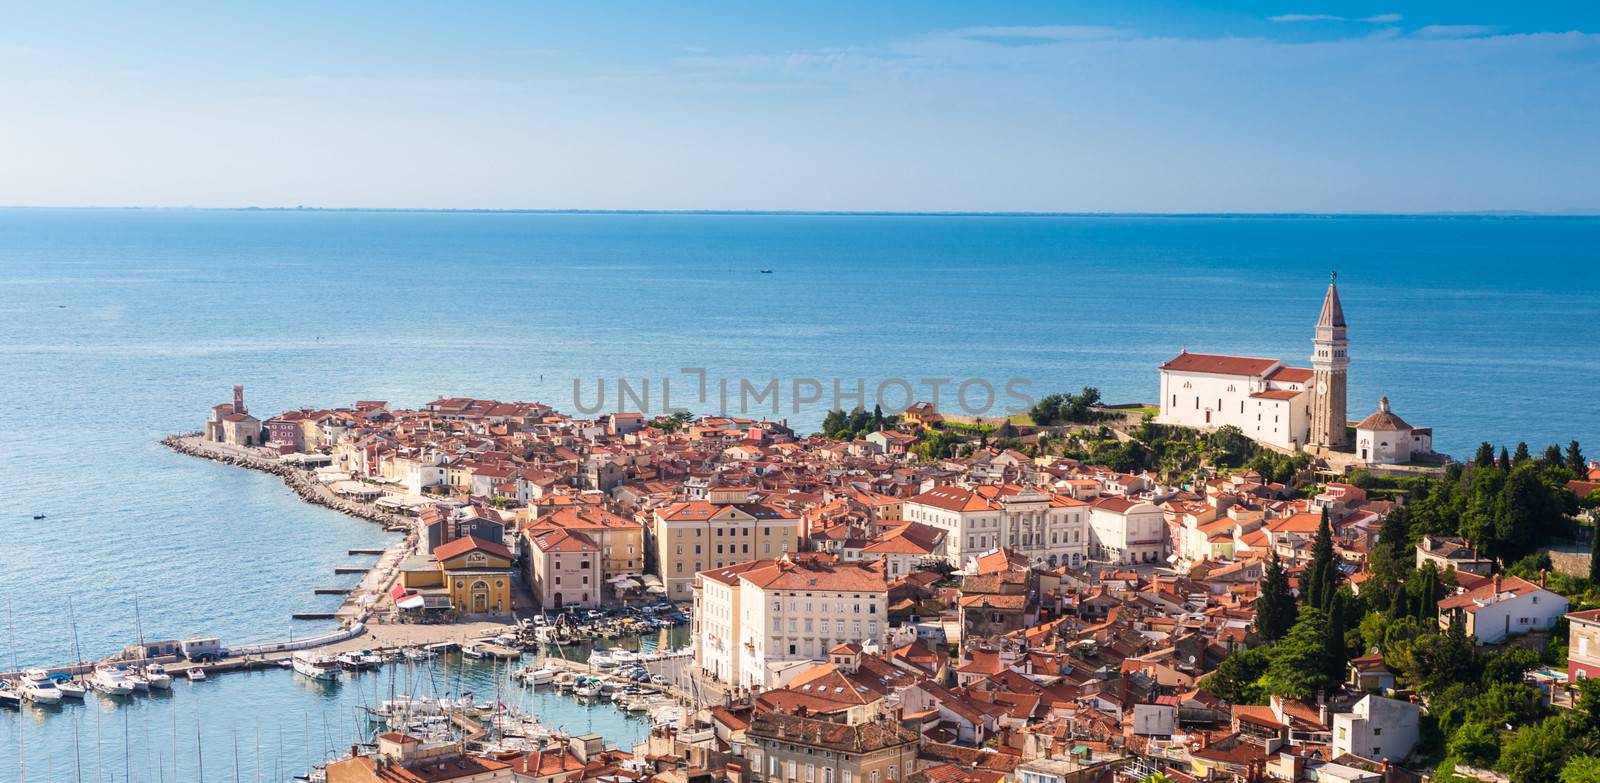 Picturesque old town Piran - Slovenia. by kasto